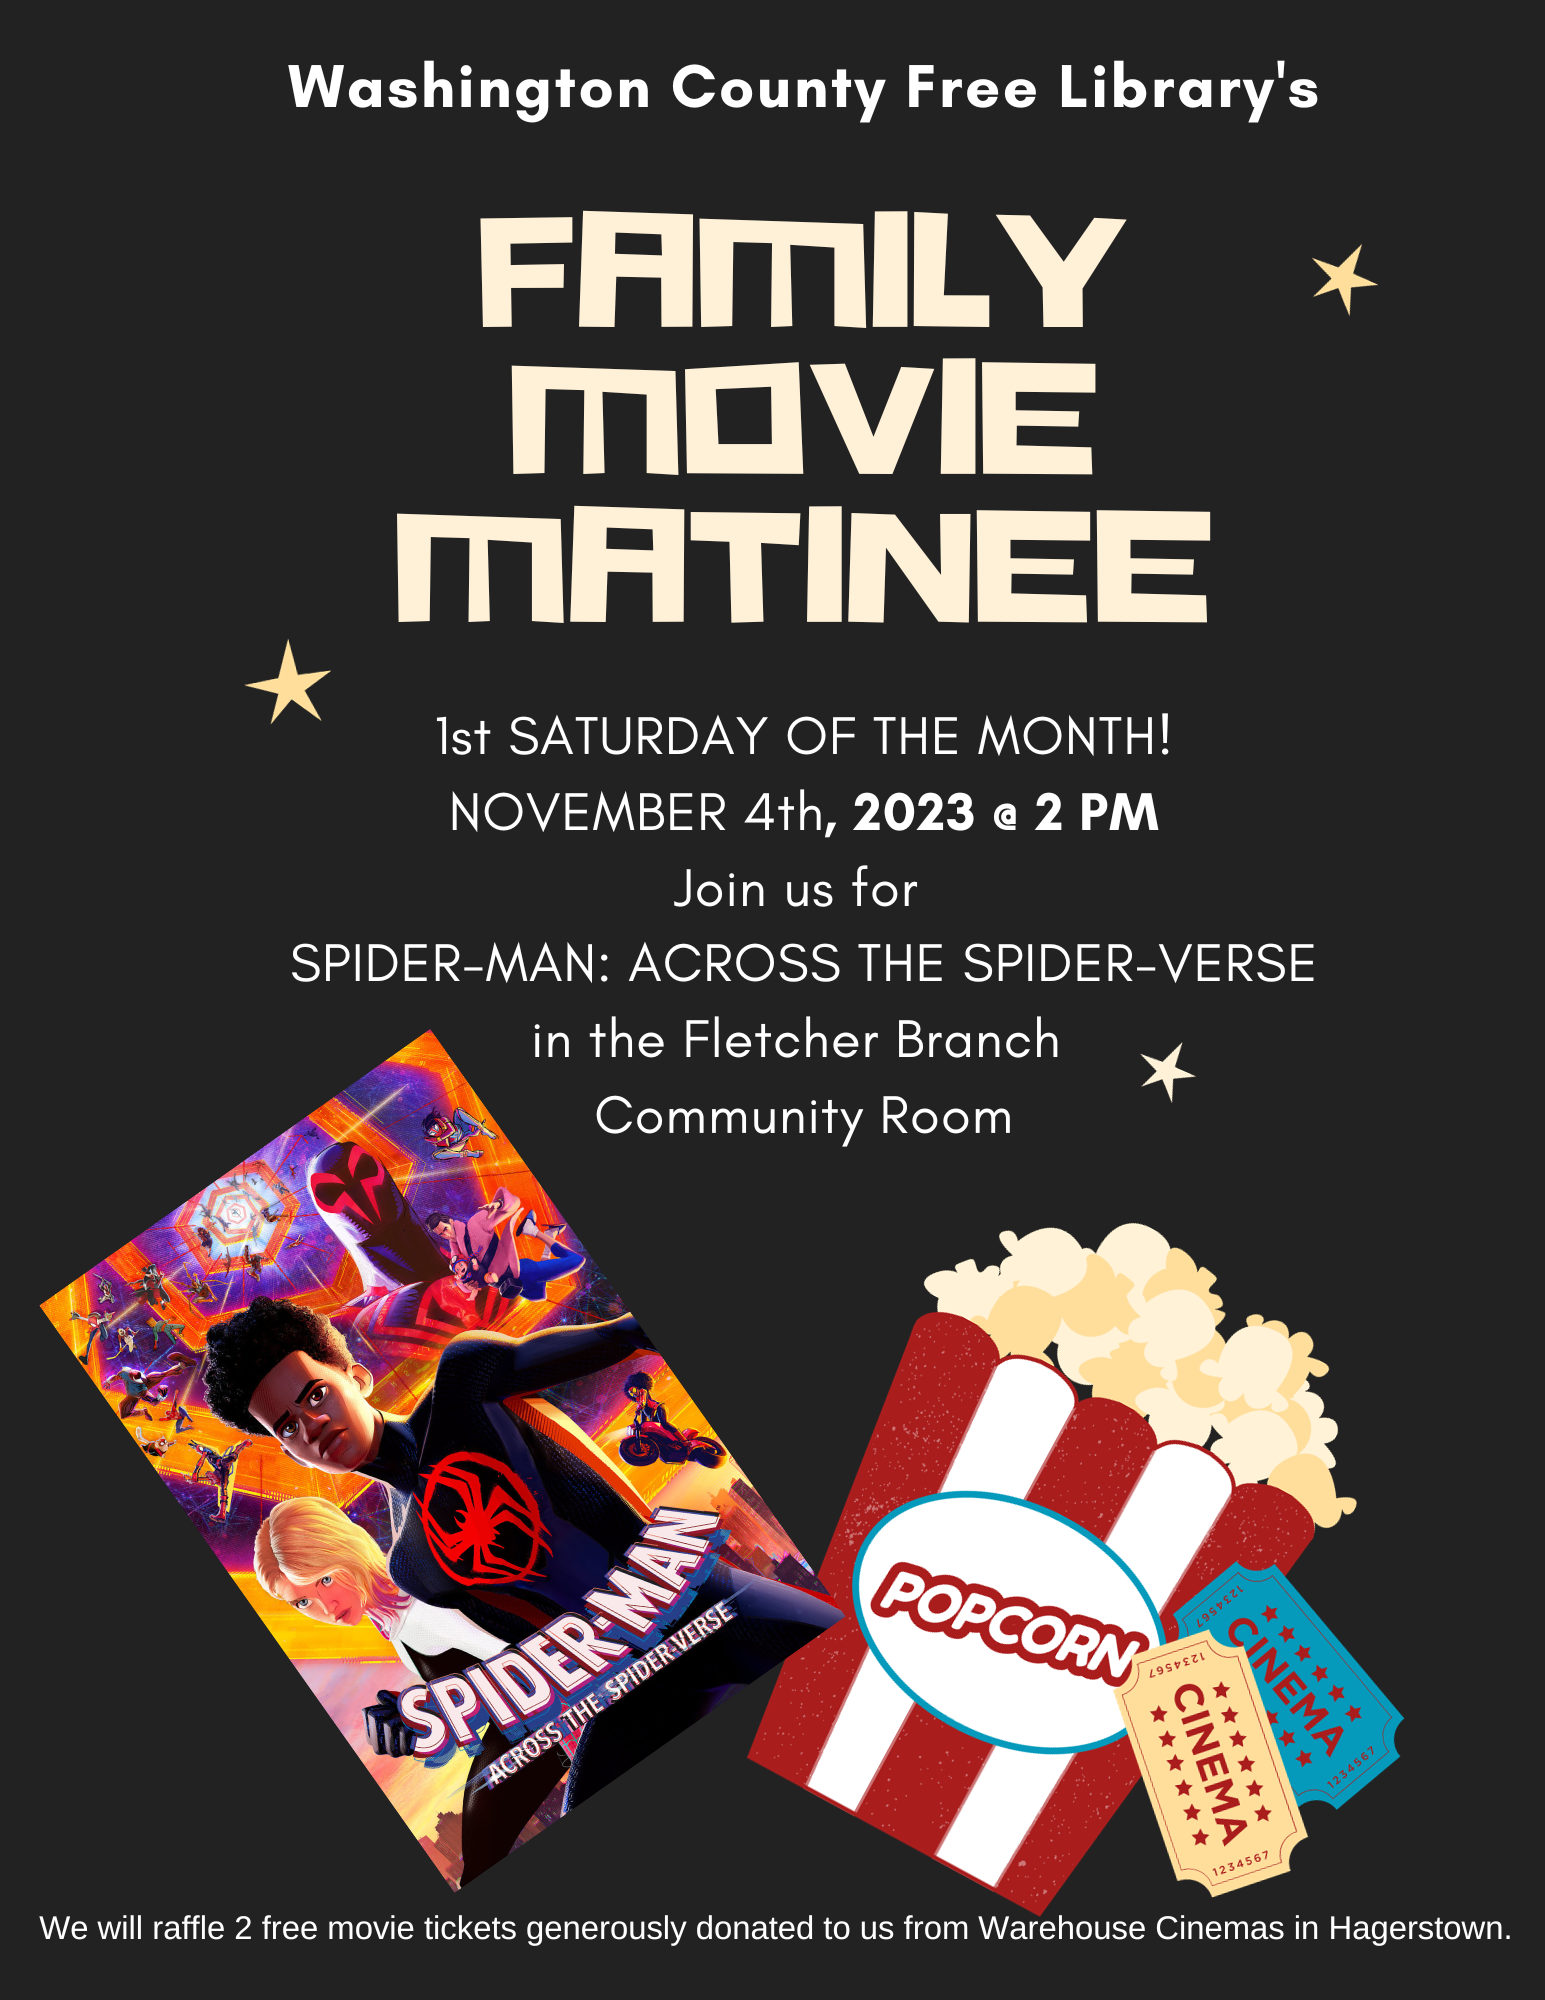 Family Movie Matinee - Spiderman: Across the Spiderverse